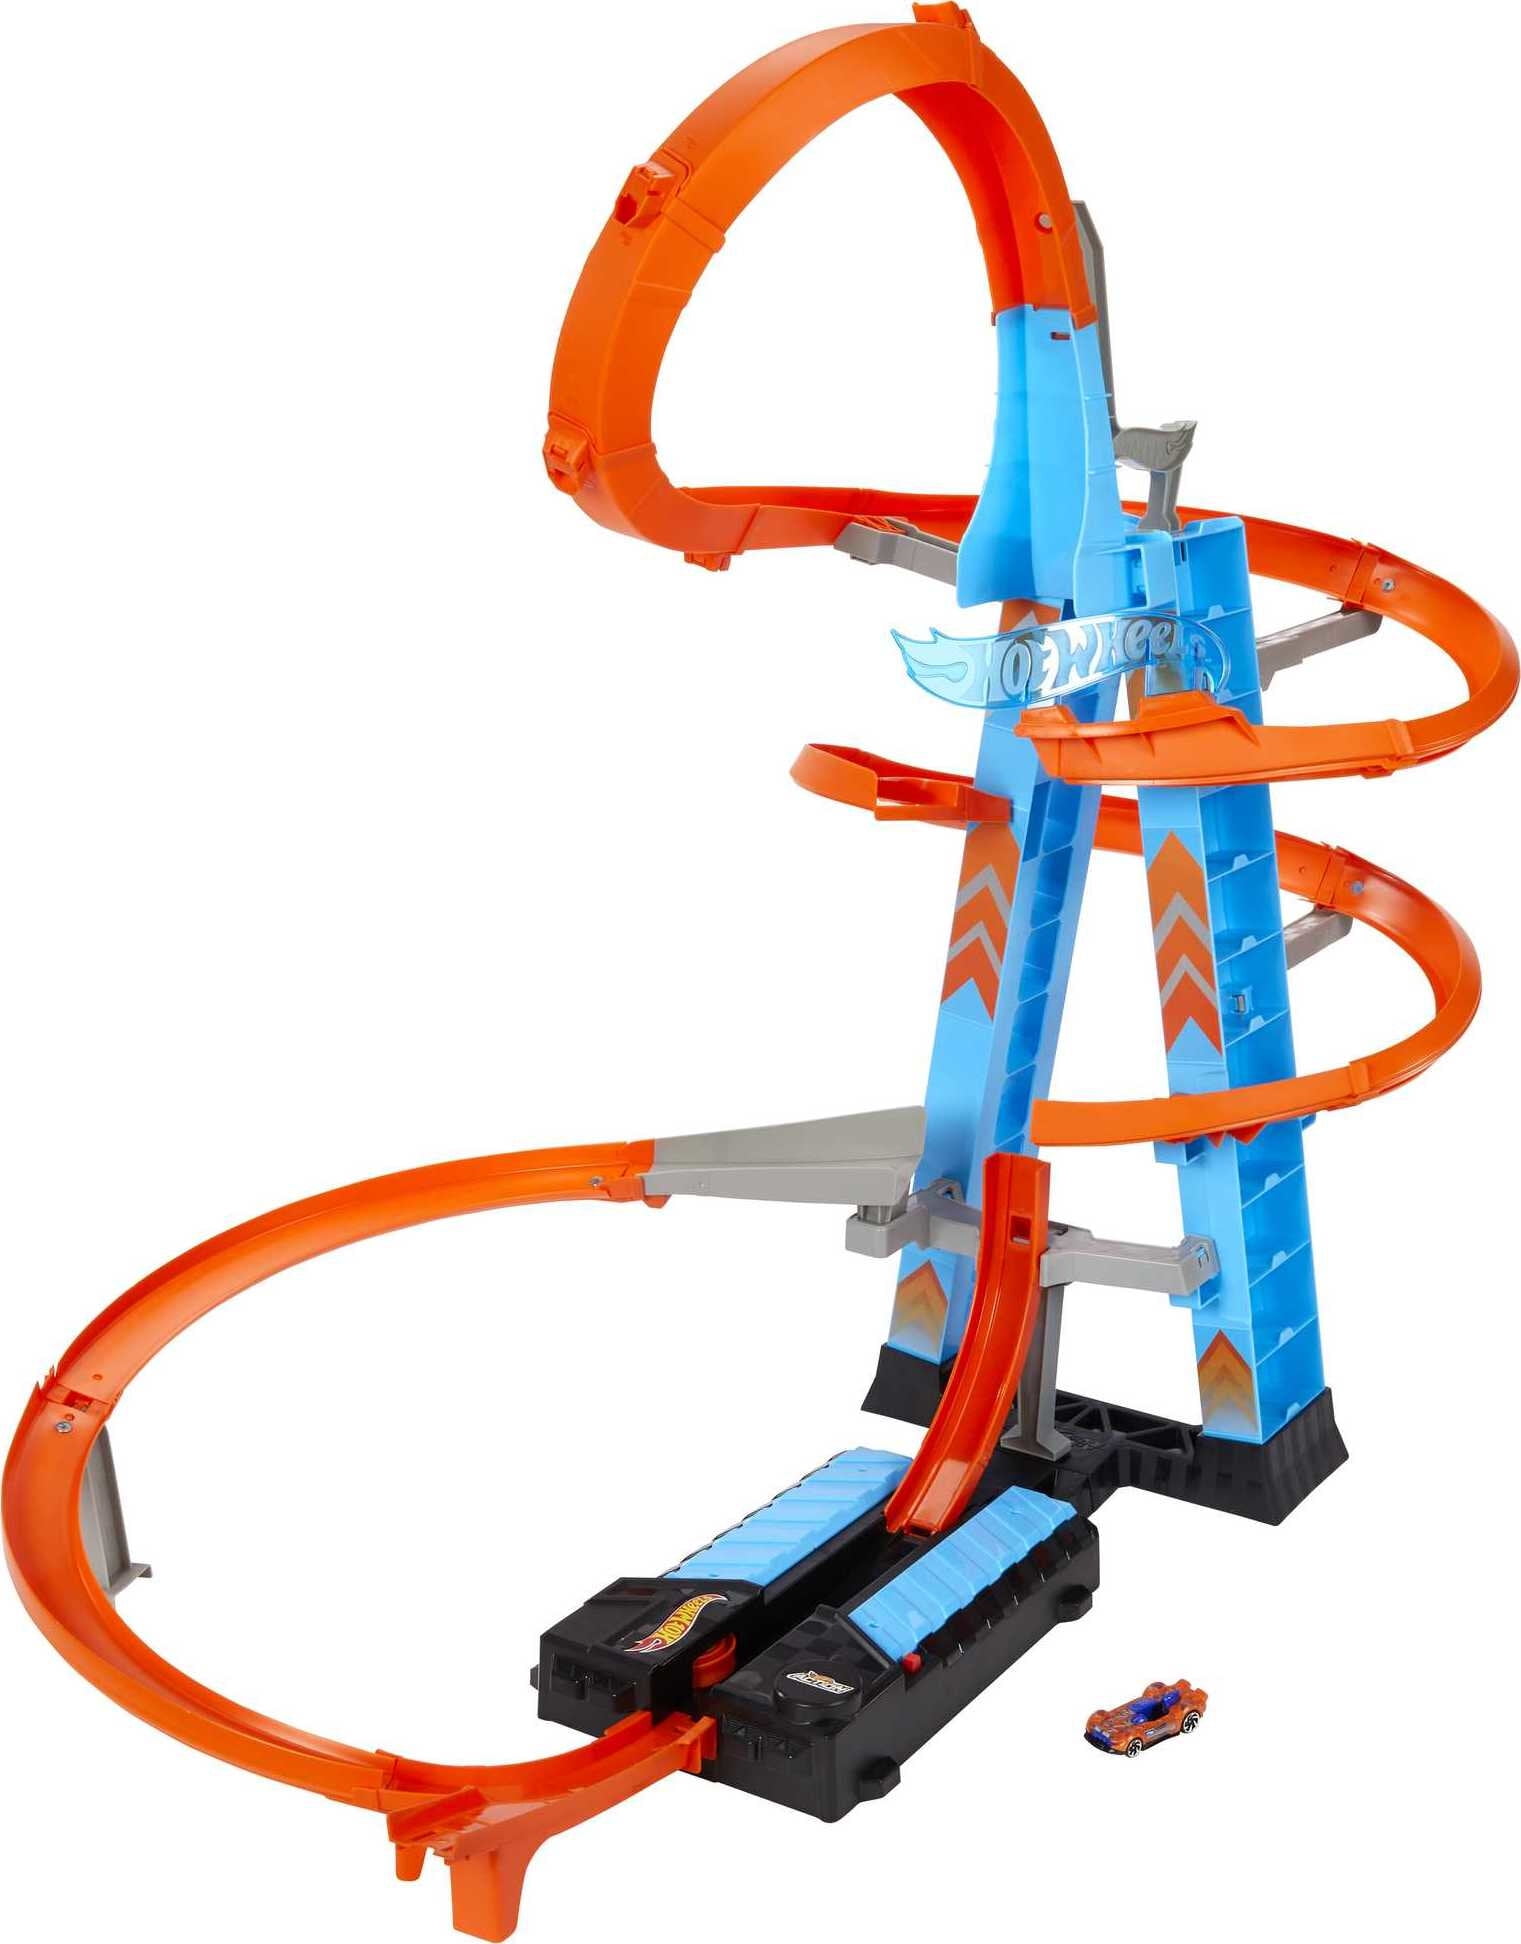 Hot Wheels Action Energy Track Multi Car Loops Age 5-7 Boy Toys Gift 3 Cars 084 for sale online 